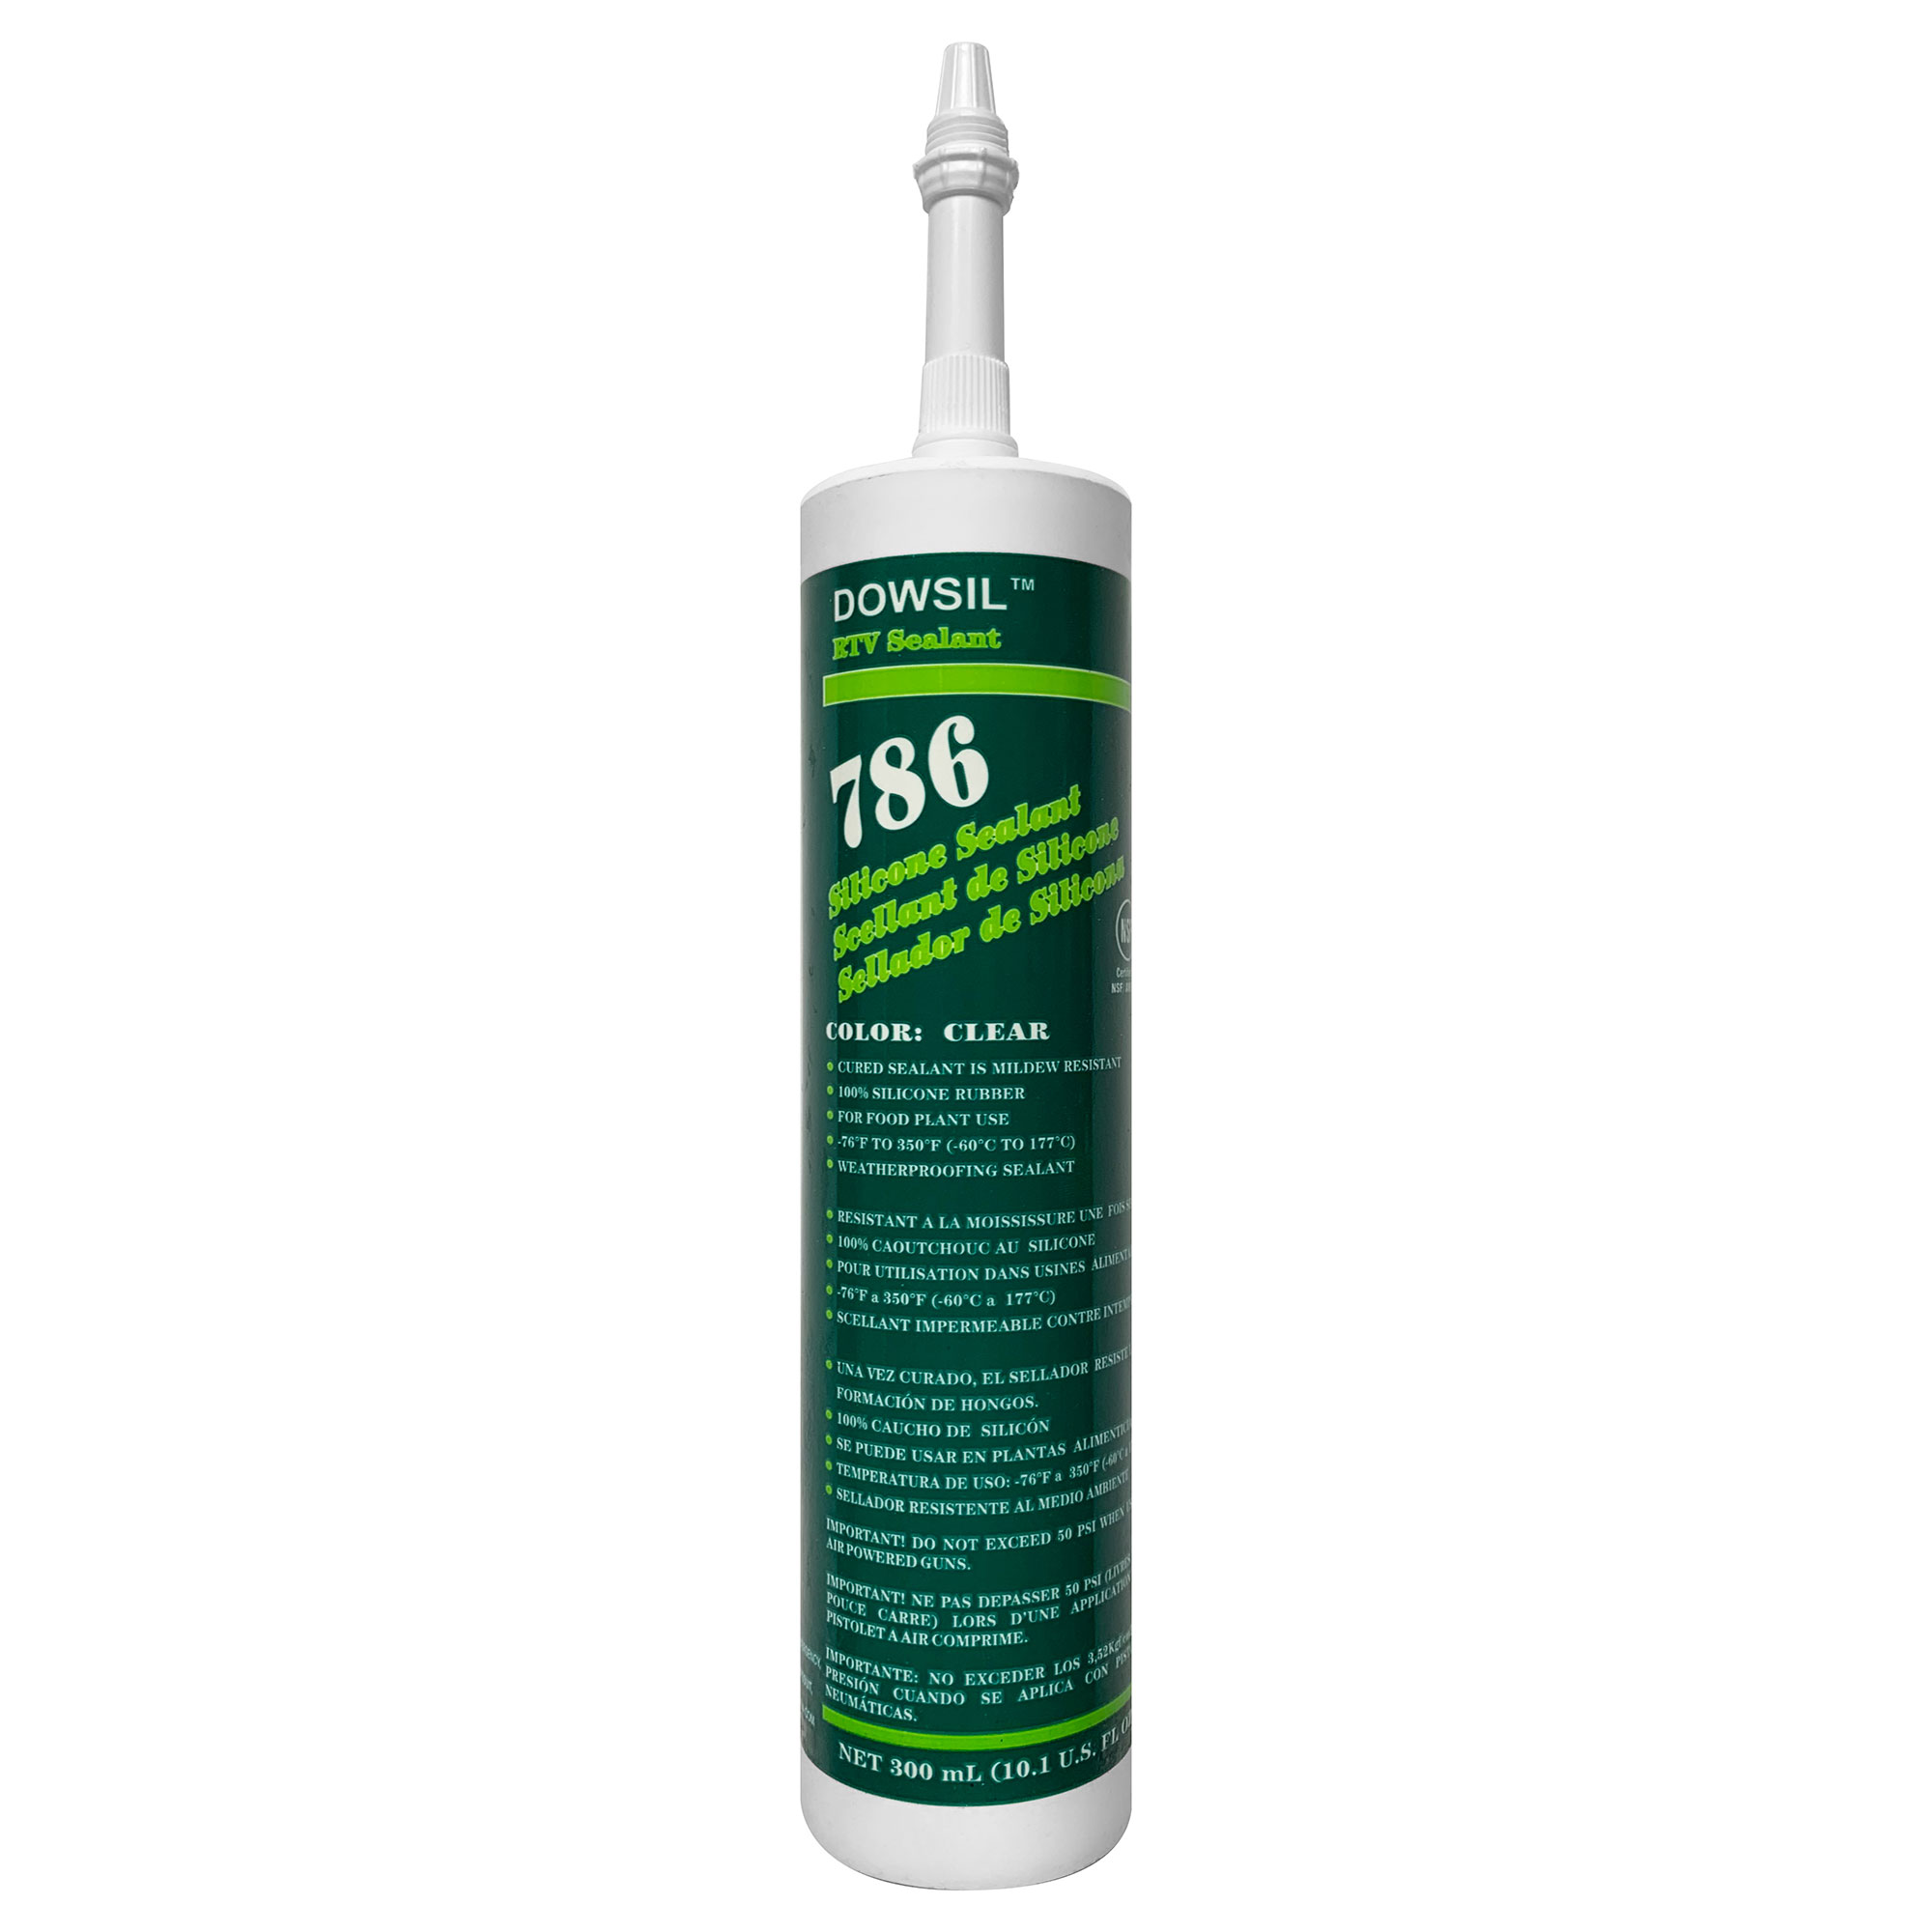 Transparent Silicone Sealant at Rs 80/piece